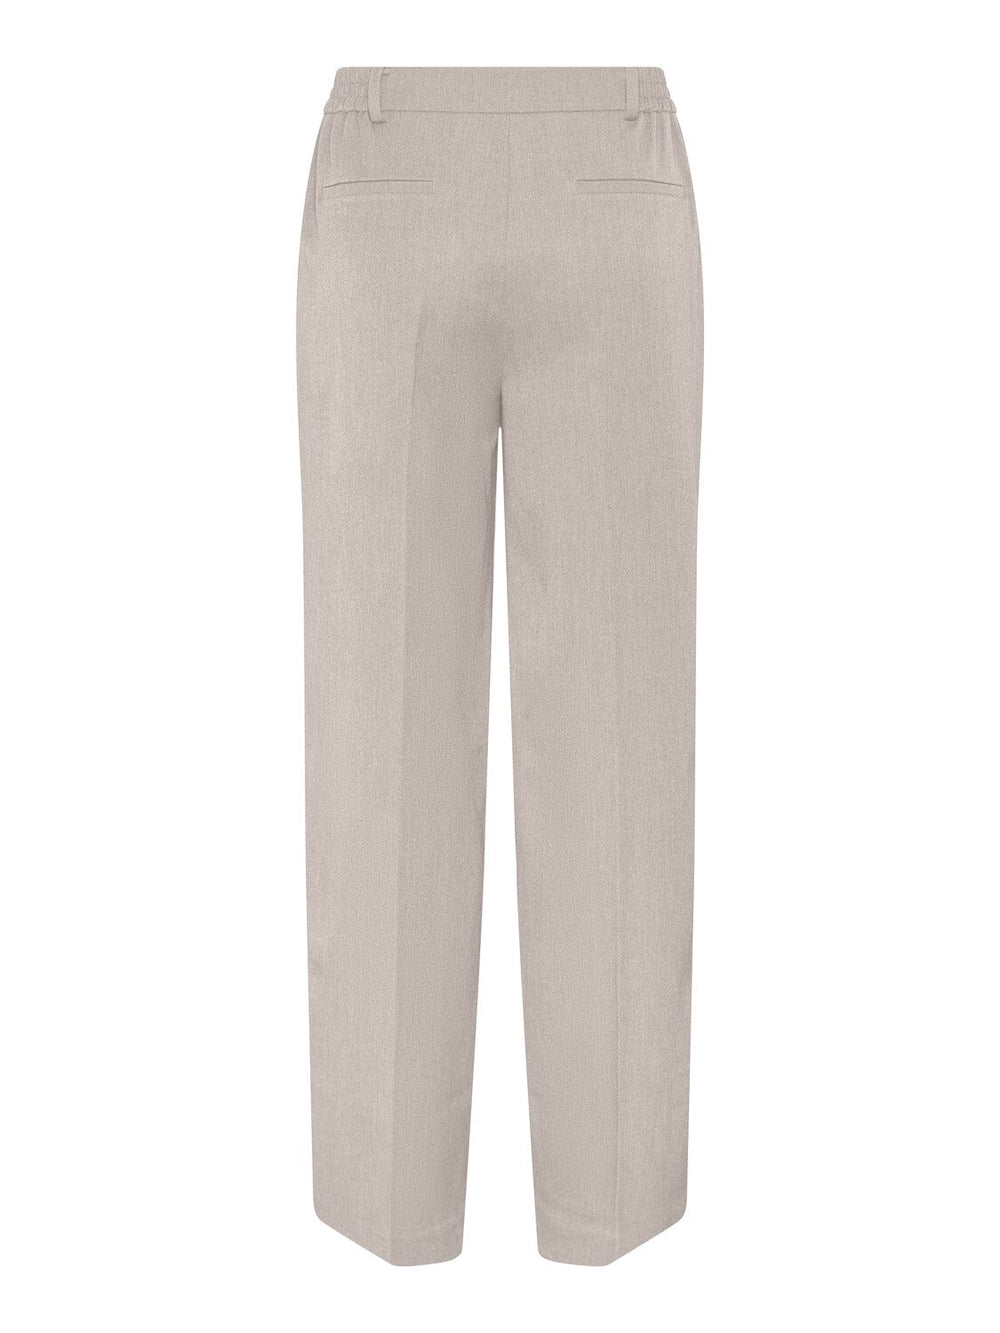 Pieces, Pccamil Hw Wide Pant, Silver Gray